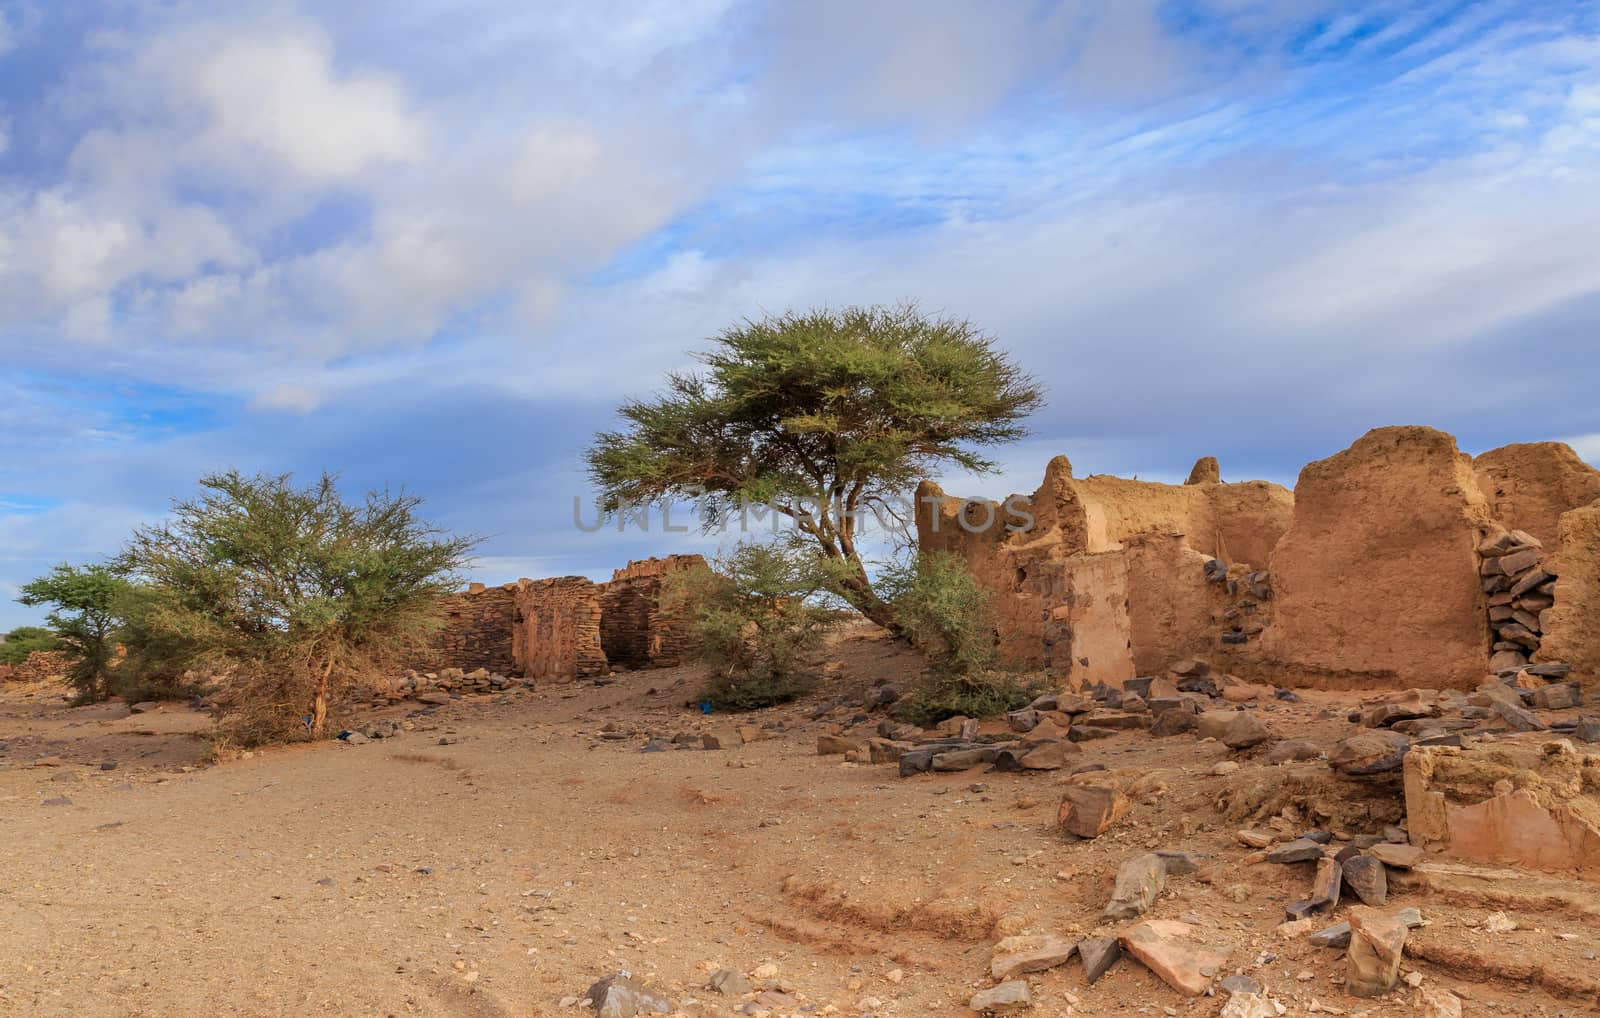 ruins of the ancient town, Morocco by Mieszko9